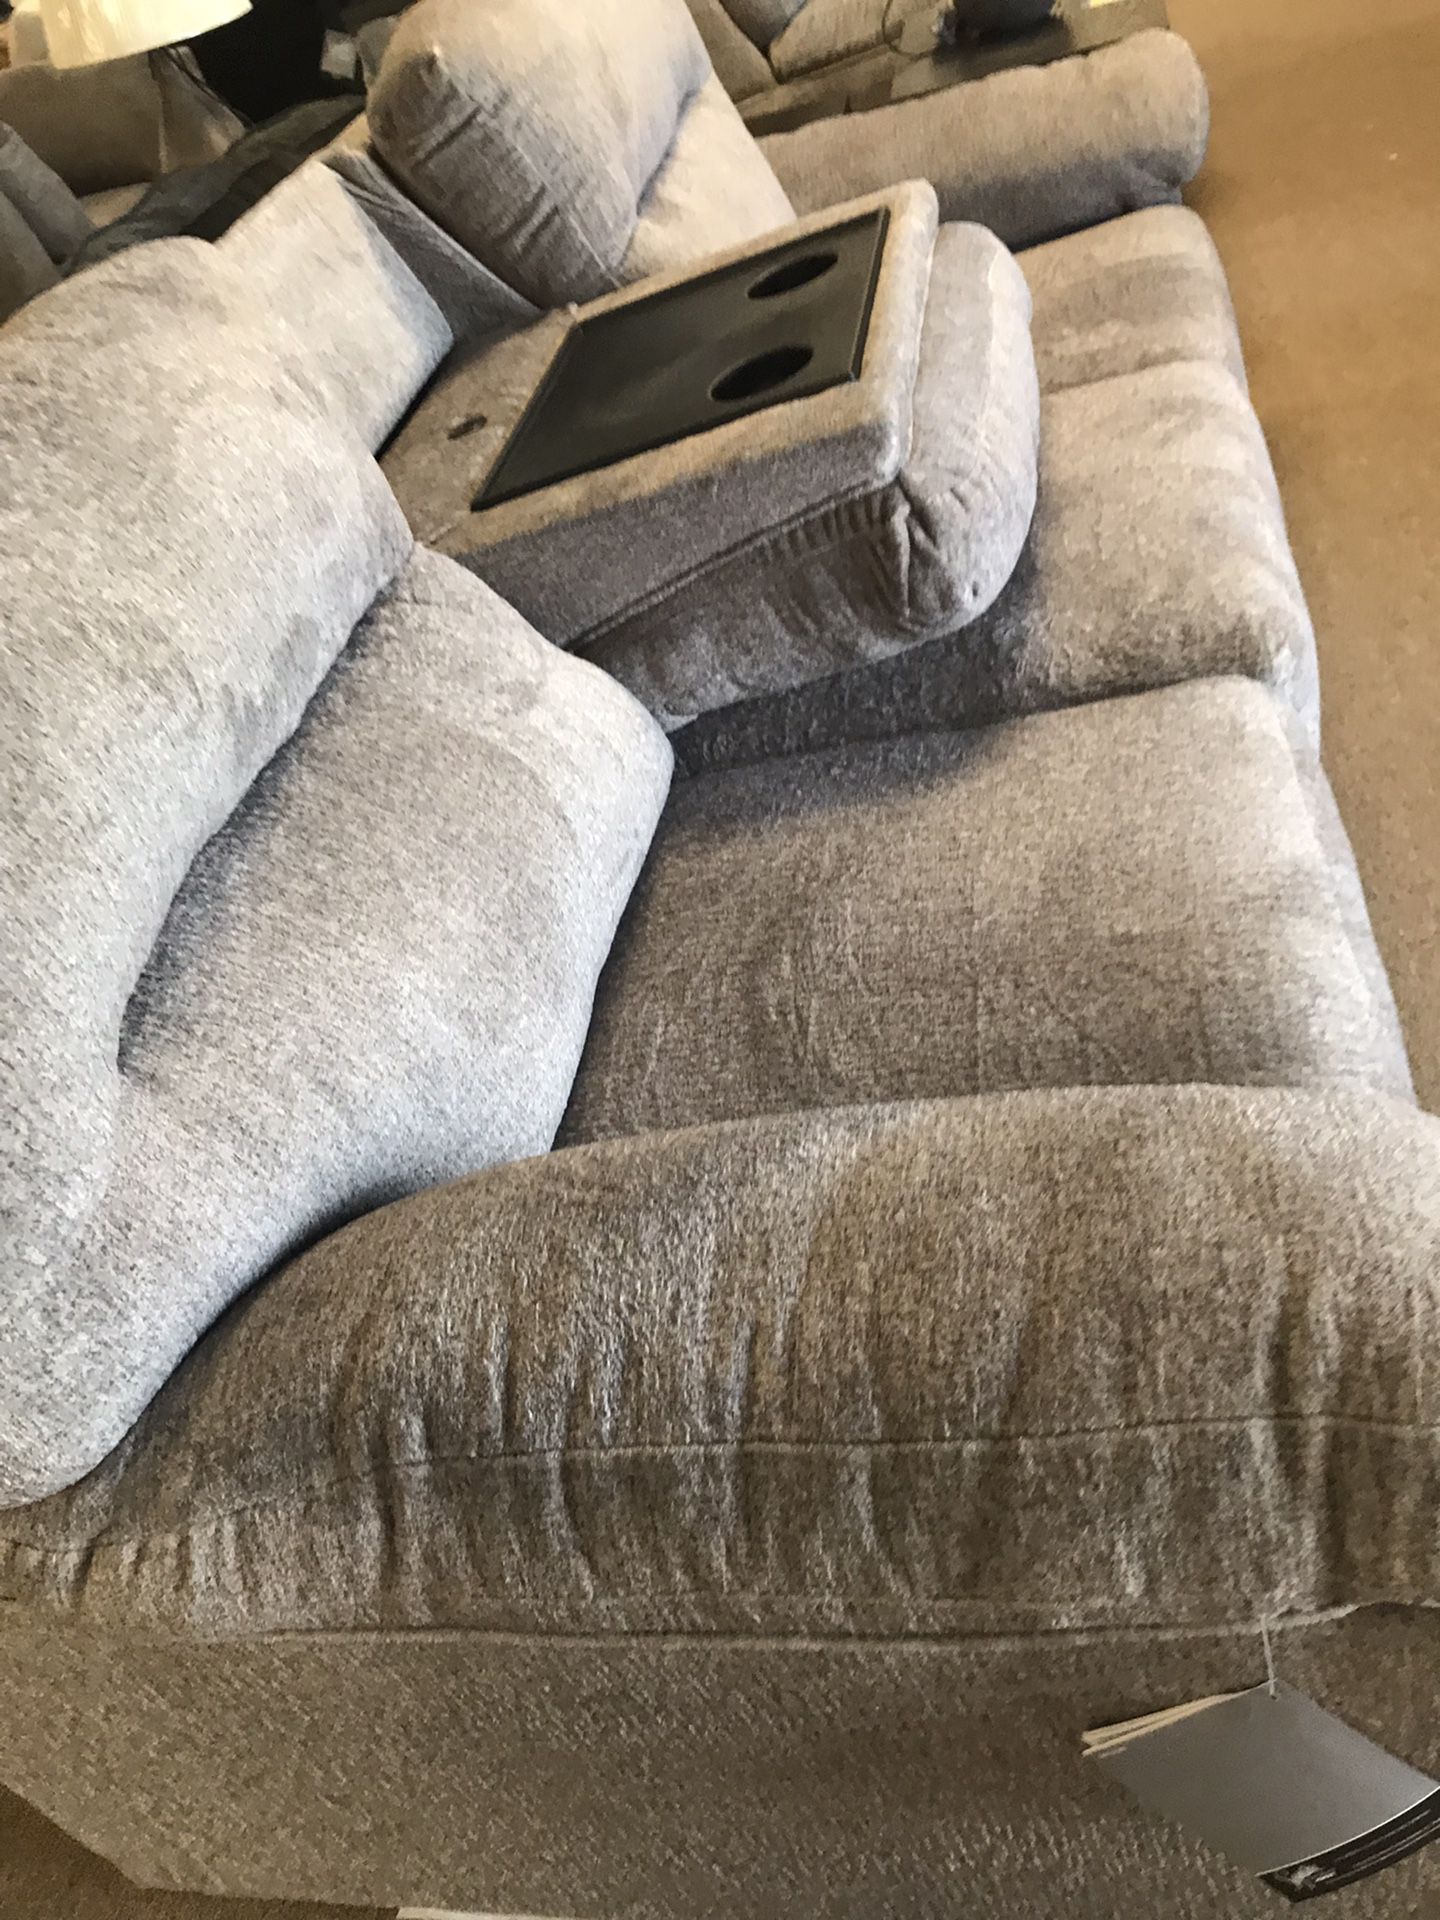 Couch And Sectional Sale